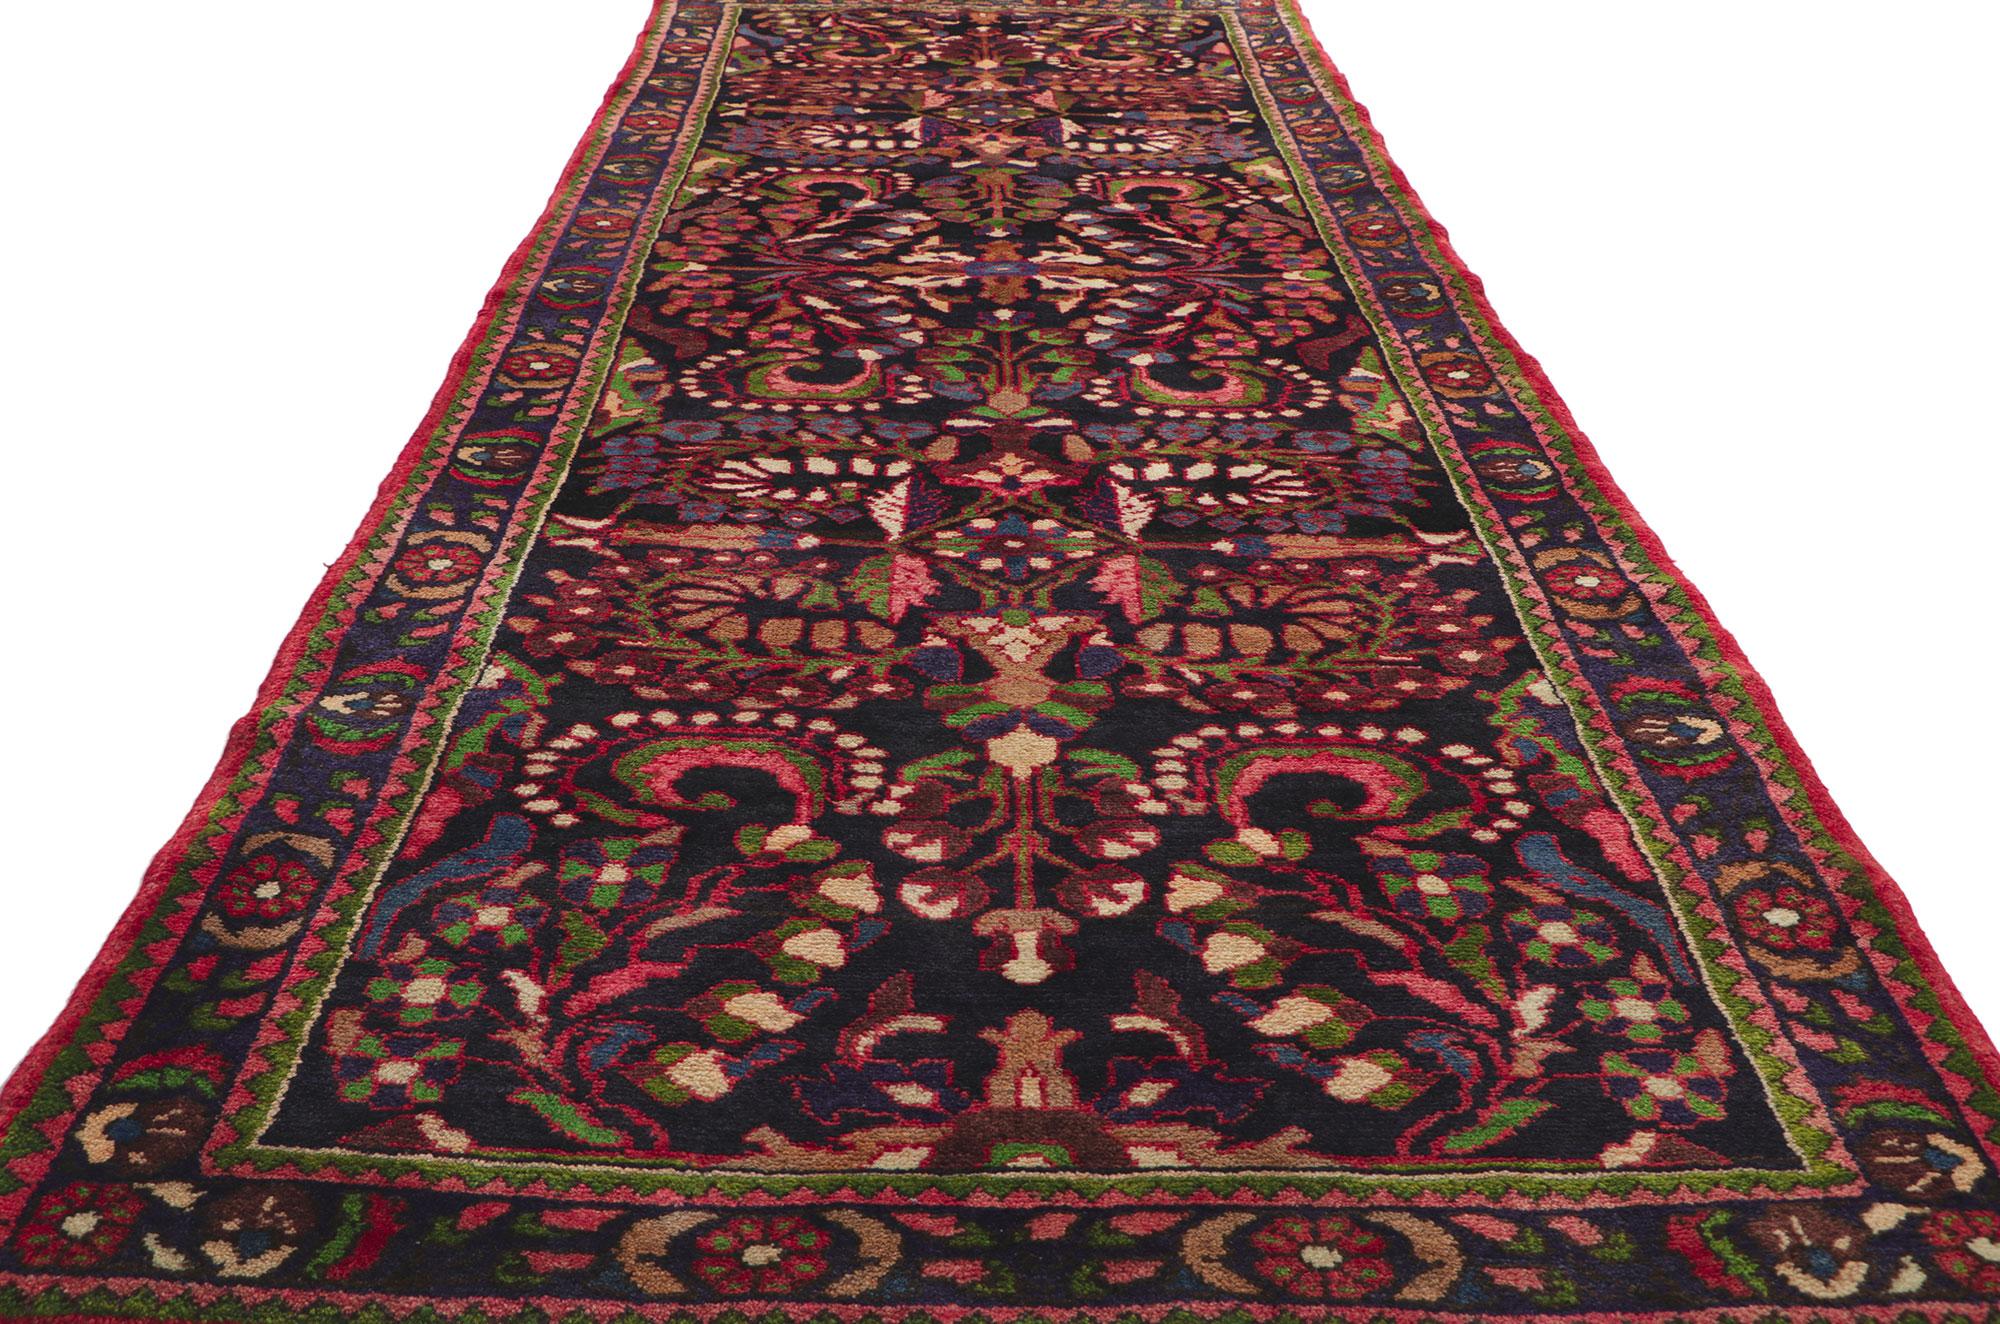 Vintage Persian Malayer Rug, Timeless Elegance Meets Whimsical Sophistication In Good Condition For Sale In Dallas, TX